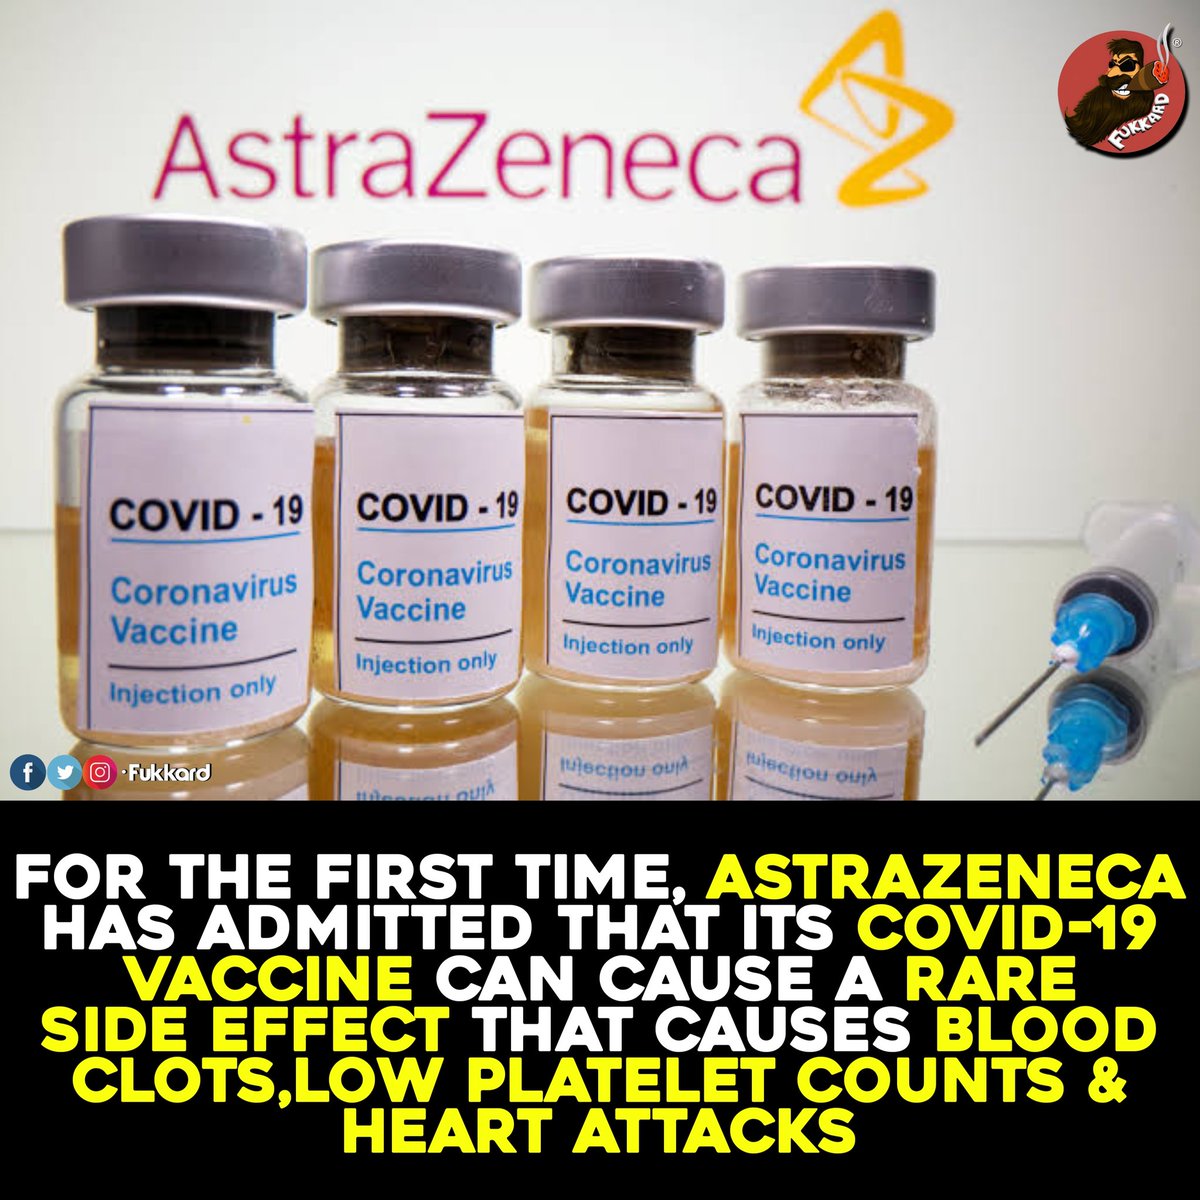 #AstraZeneca has admitted for the first time in court documents that its #CovidVaccine can cause a rare side effect, in an apparent about-turn that could pave the way for a multi-million-pound legal payout #bloodclot #astrazenecavaccine #Covishield #Covaxin #heartattack #Corona